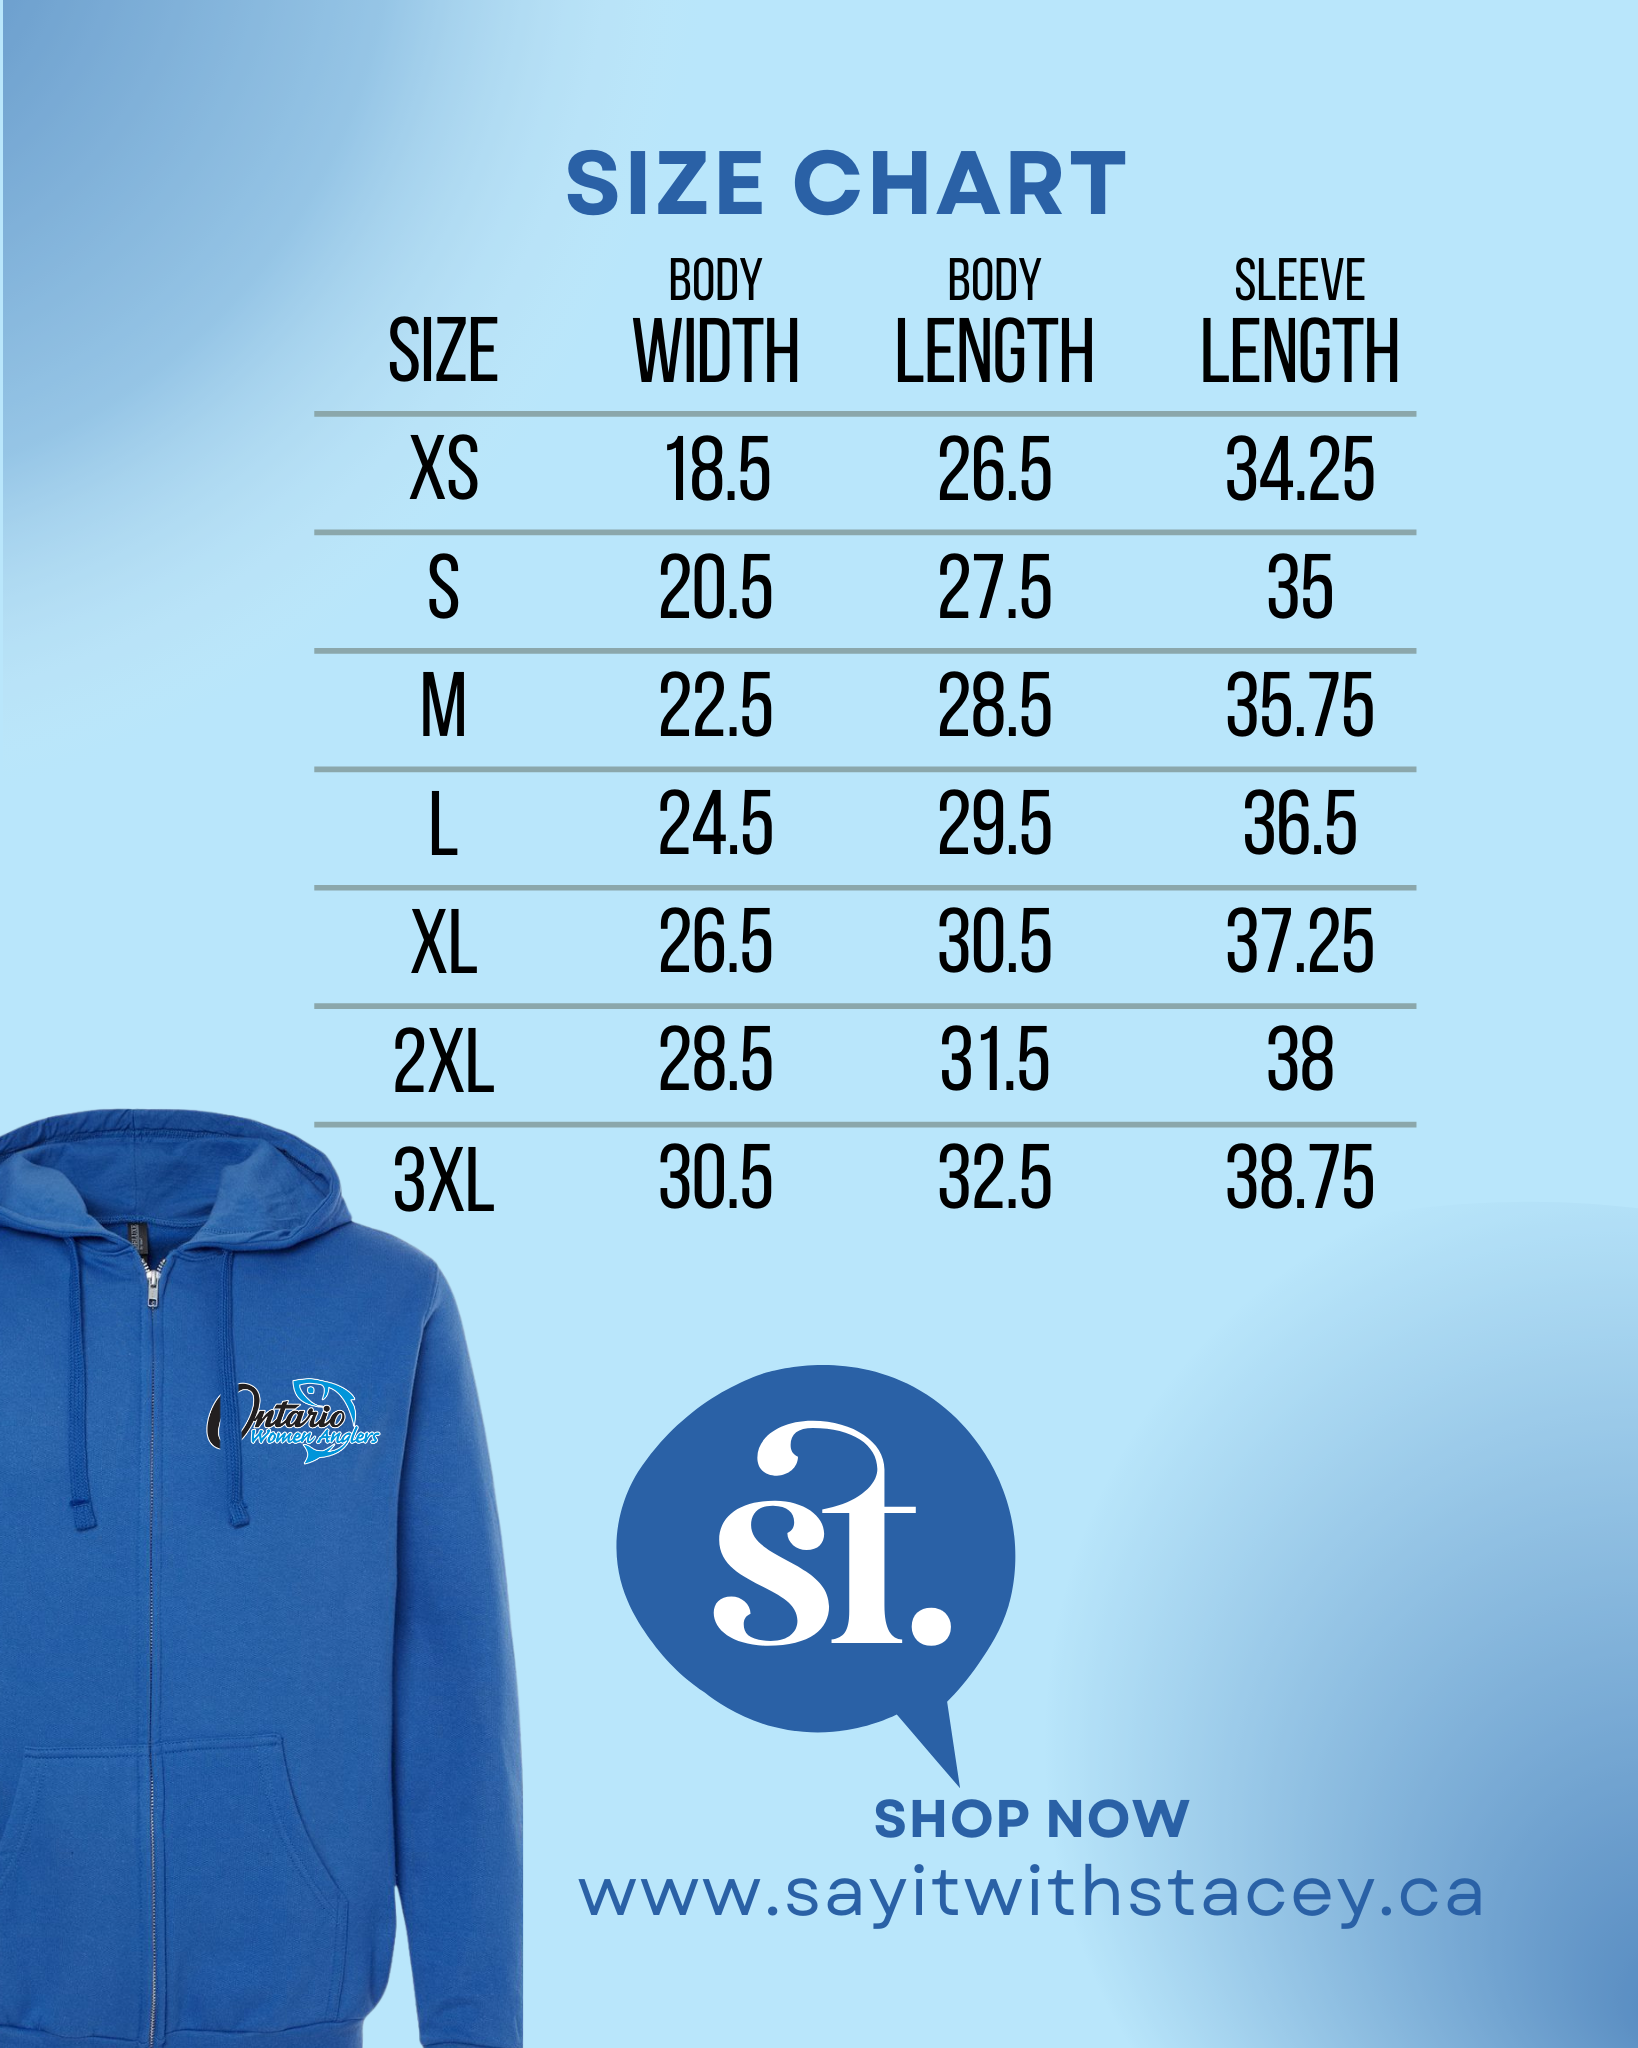 Say it with Stacey Hoodie Size Chart 